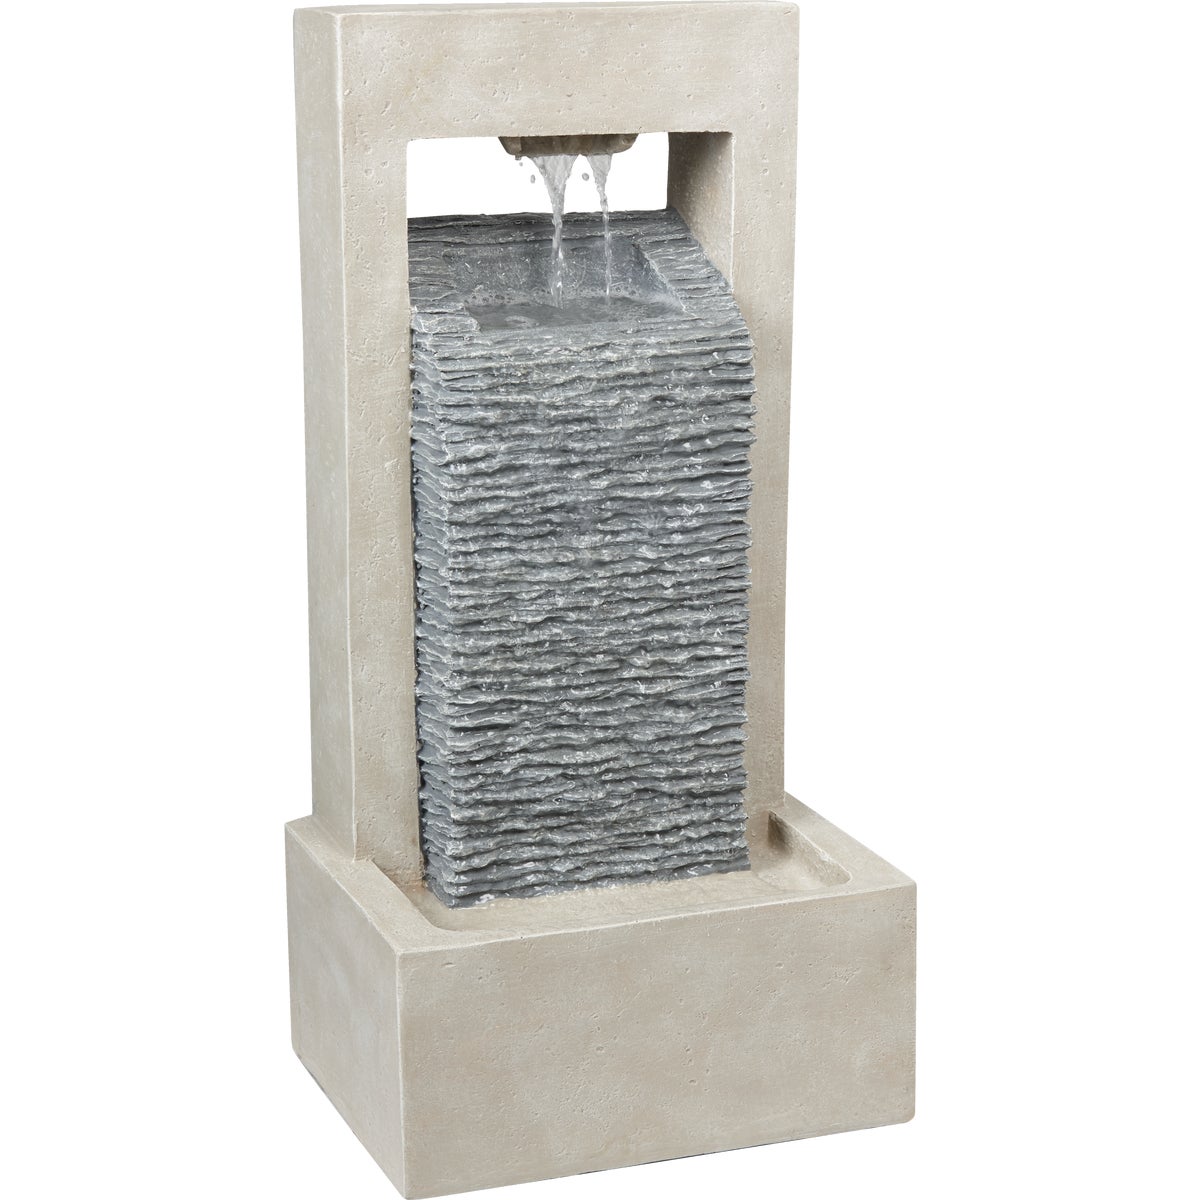 Item 801950, 2-toned modern style polyresin fountain is designed to appear as a 